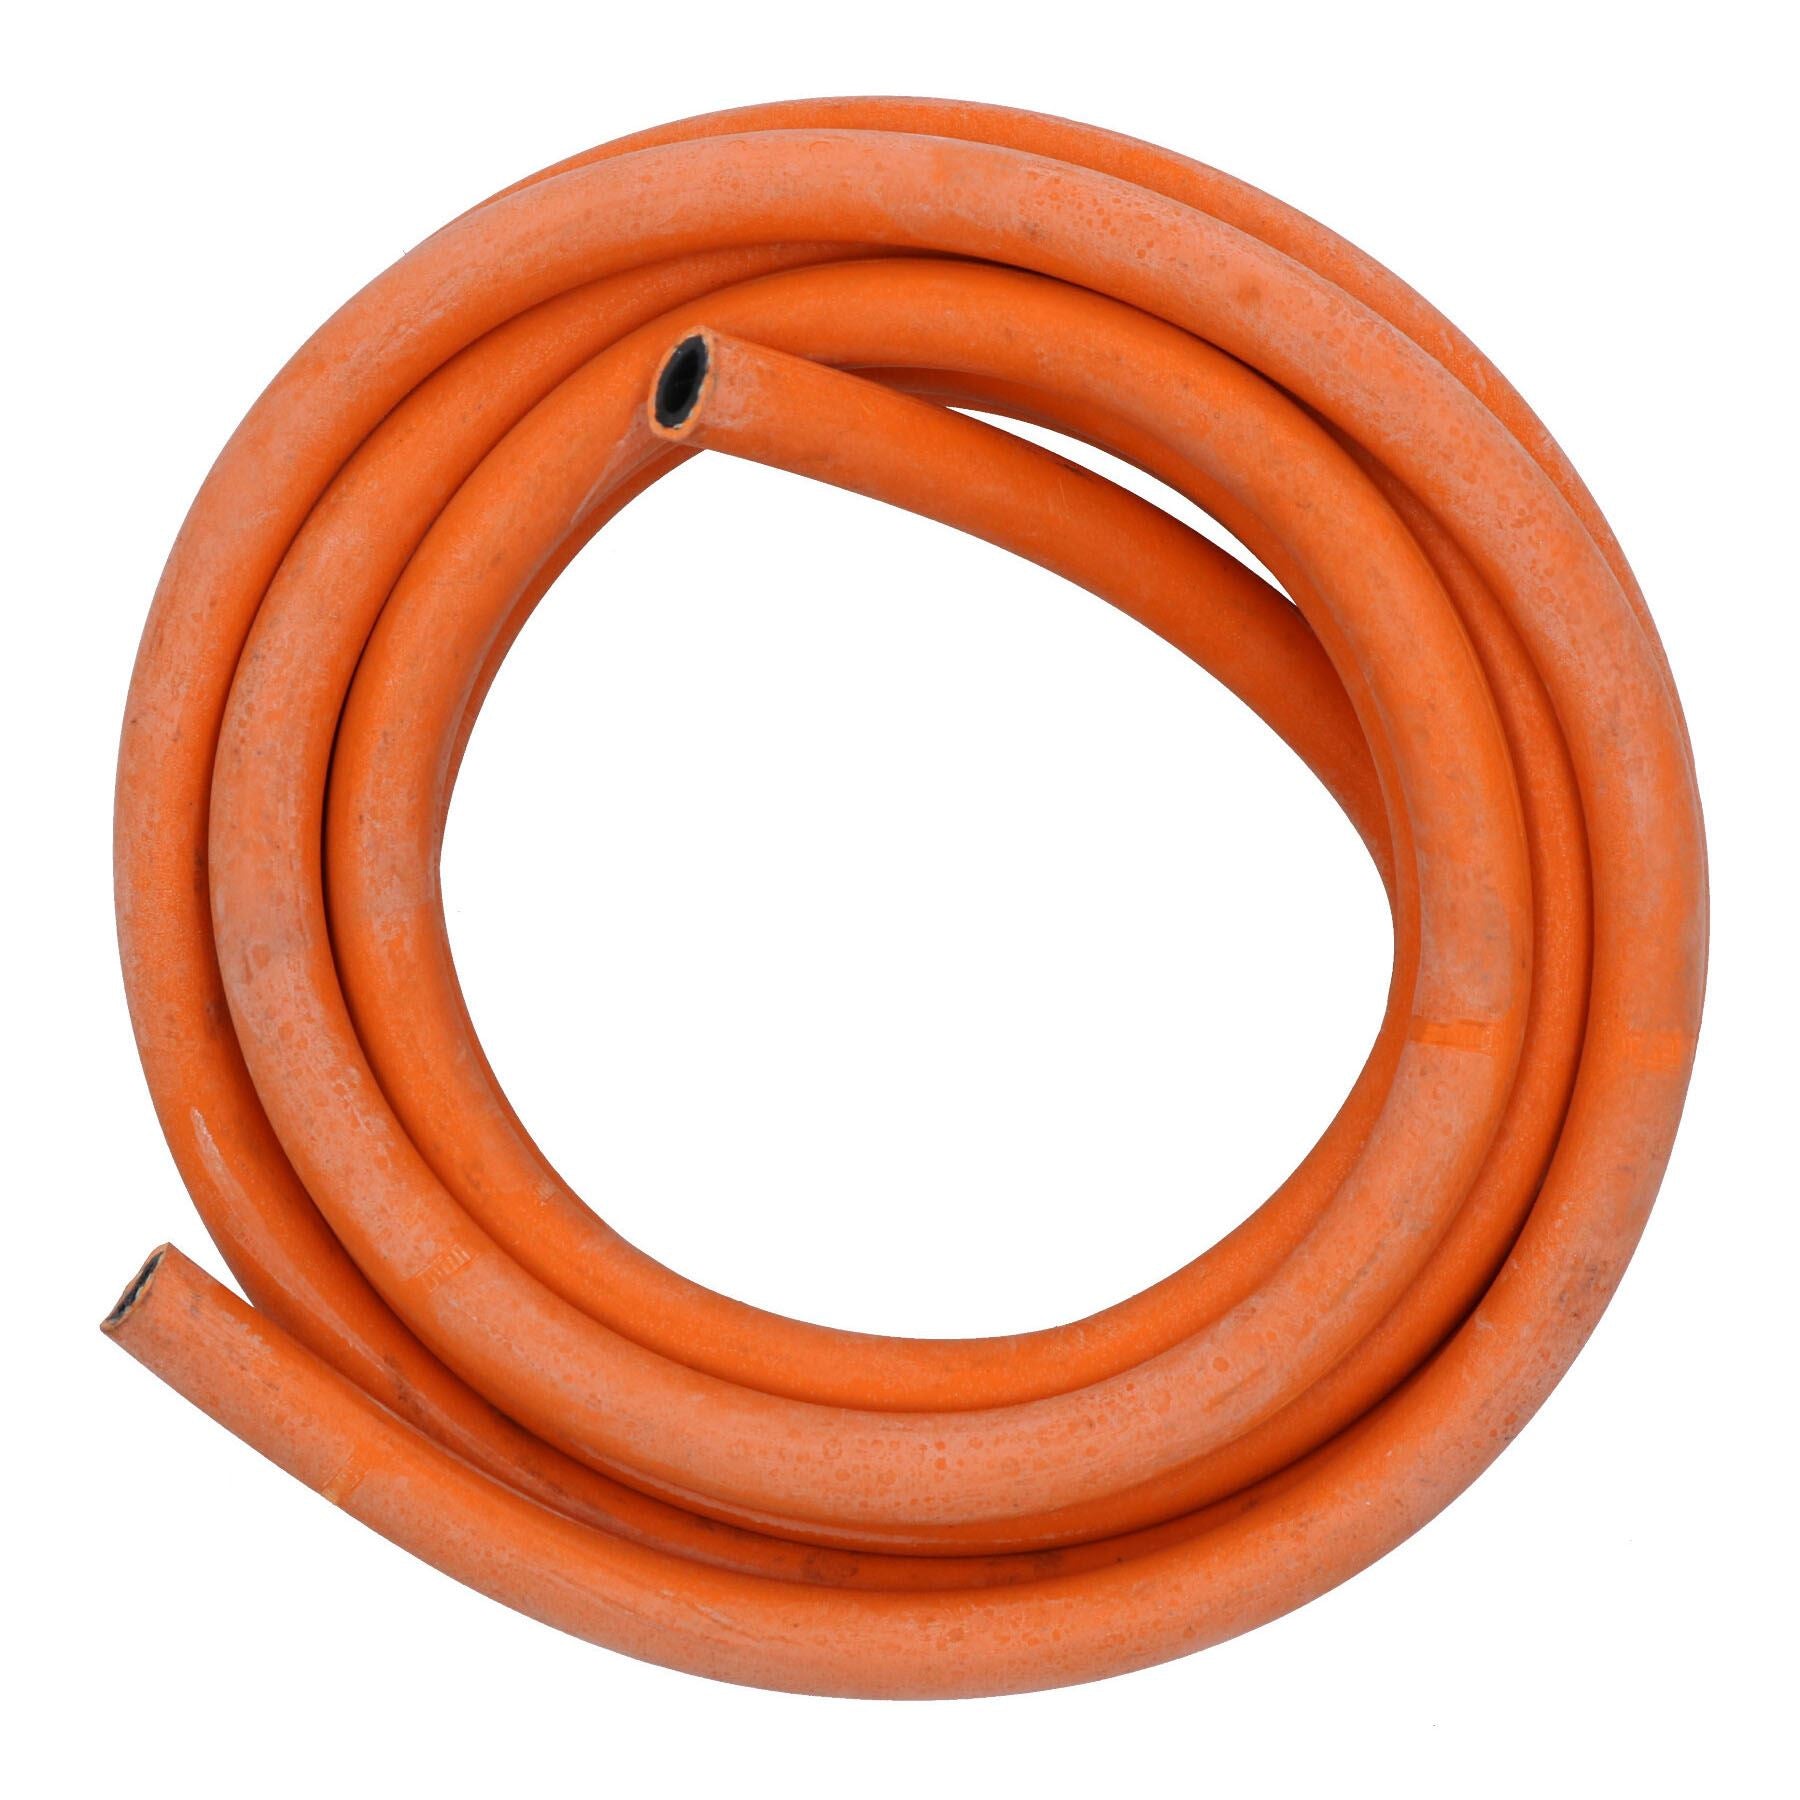 5m LPG Gas Hose Pipe for Propane Butane without Connectors Caravan Barbecue